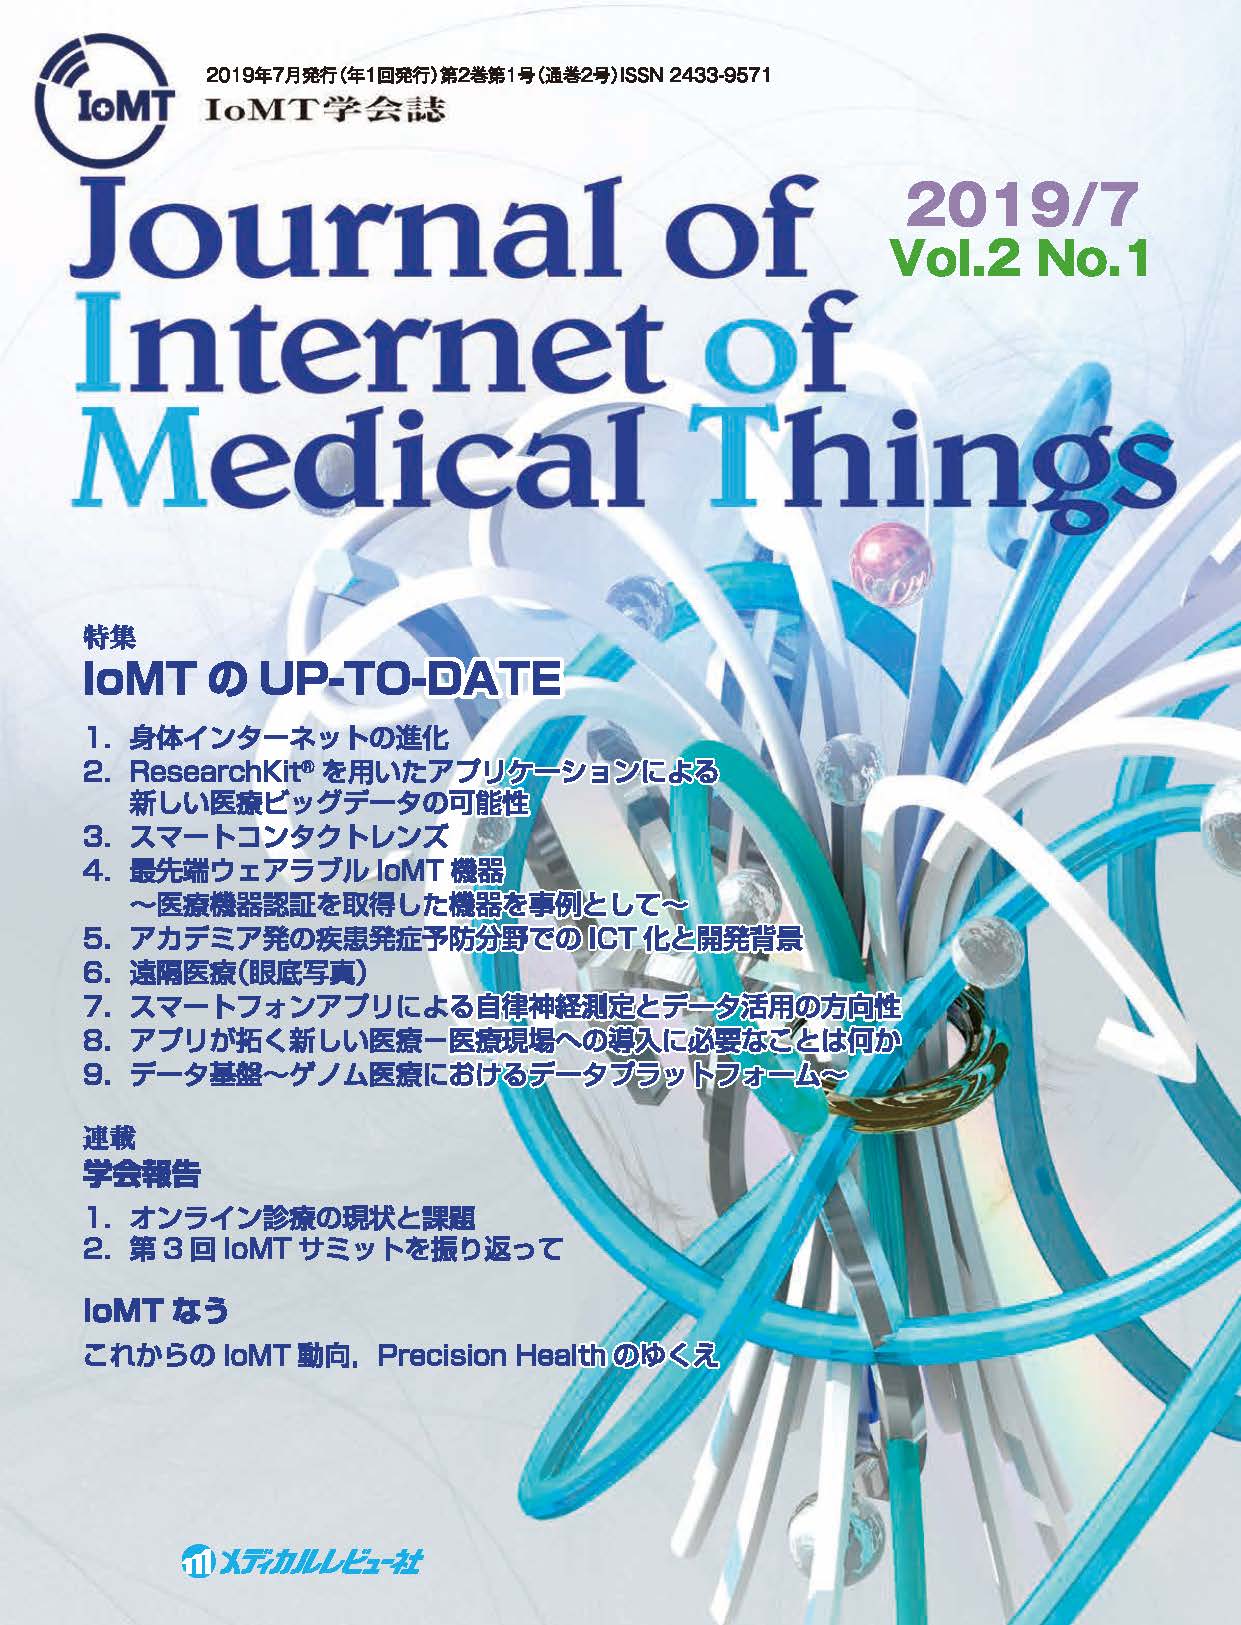 Journal of Internet of Medical Things 2019年7月号（Vol.2 No.1）